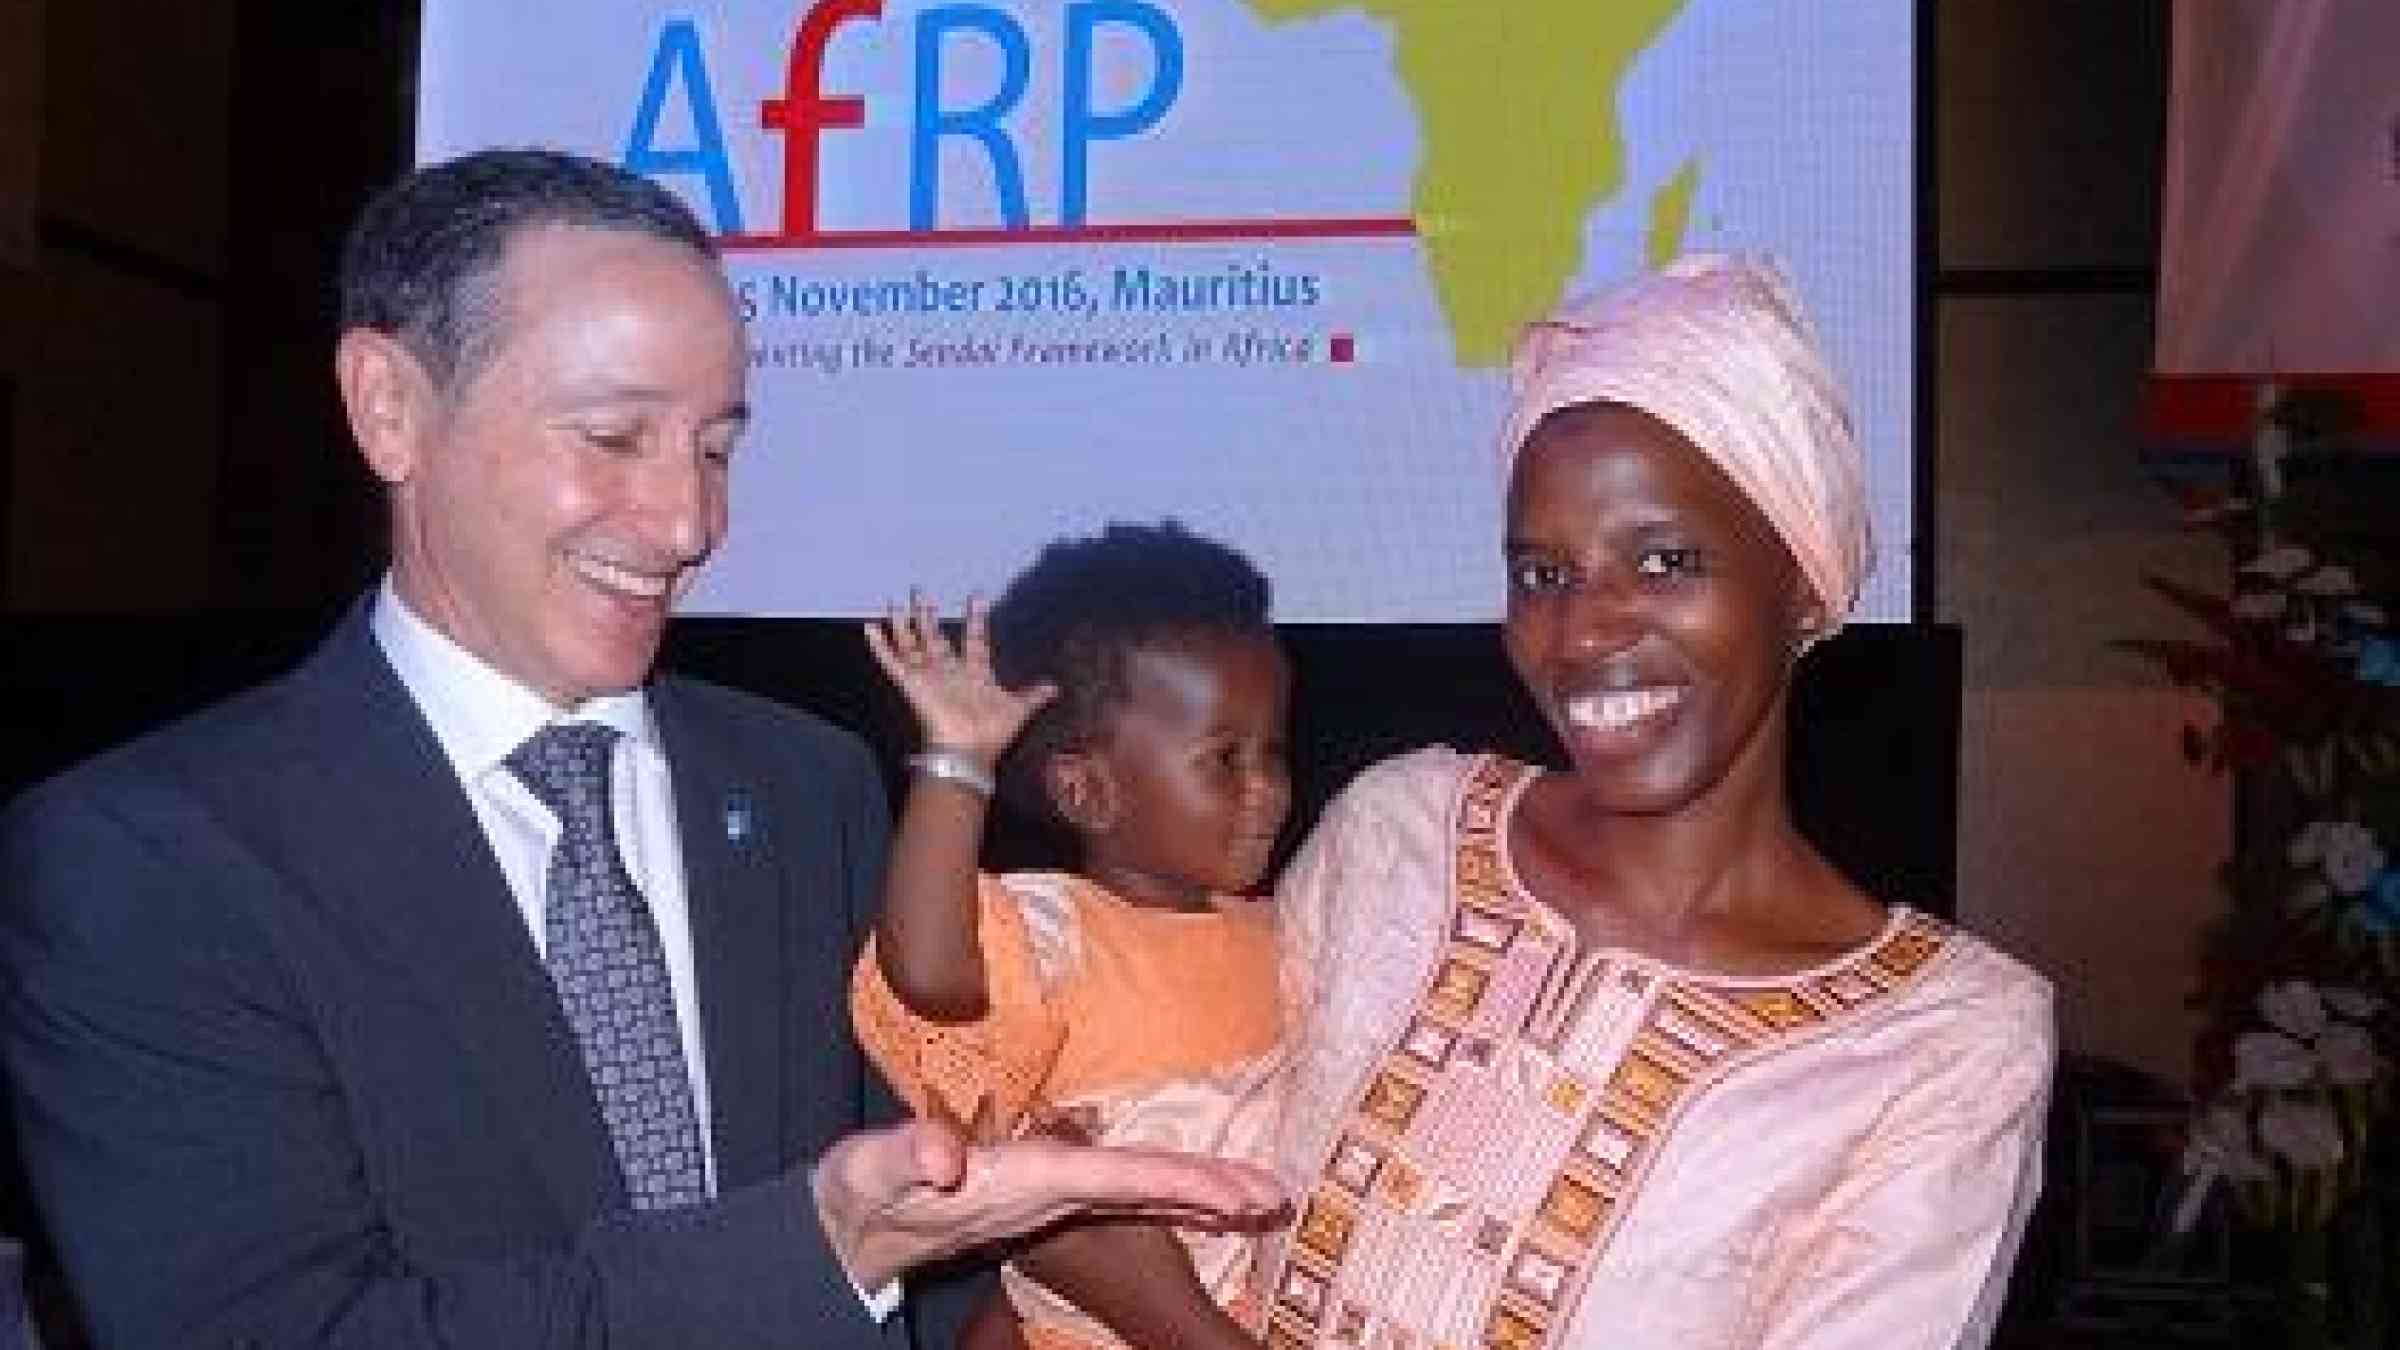 UNISDR head, Mr. Robert Glasser waits for a high-five from baby Chilal in the arms of her mother, Ms. Oumie Sissokho, Director of Operations, Gambia National Disaster Management Agency